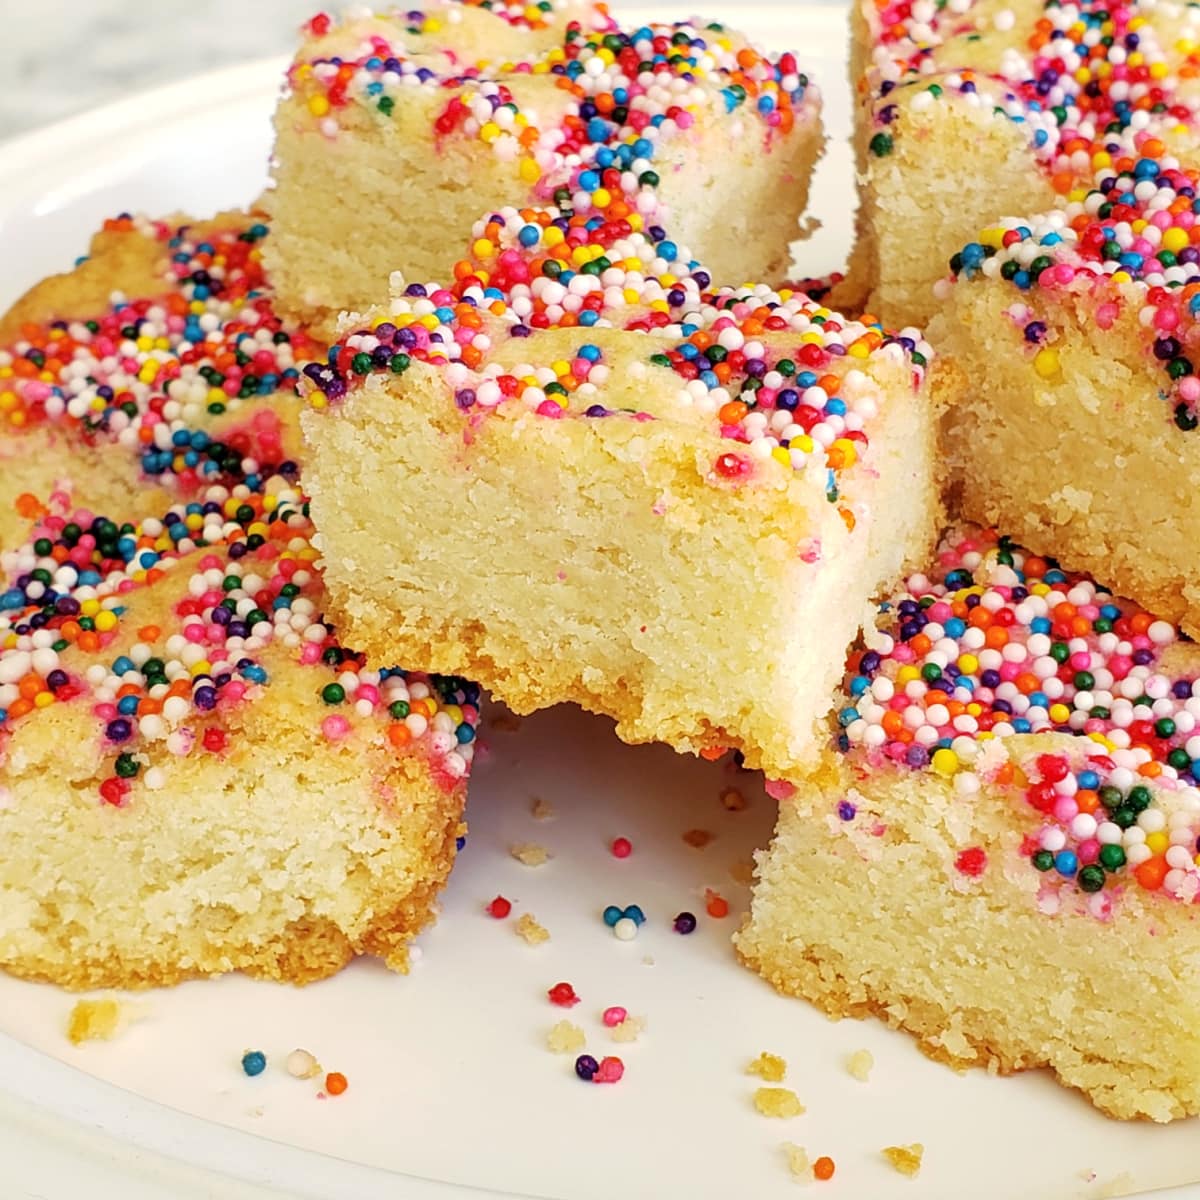 Lemon Shortbread with Sprinkles might be the perfect cookie -- sandy, lightly sweet, lemon-scented and impossibly cute with seasonal sprinkles.